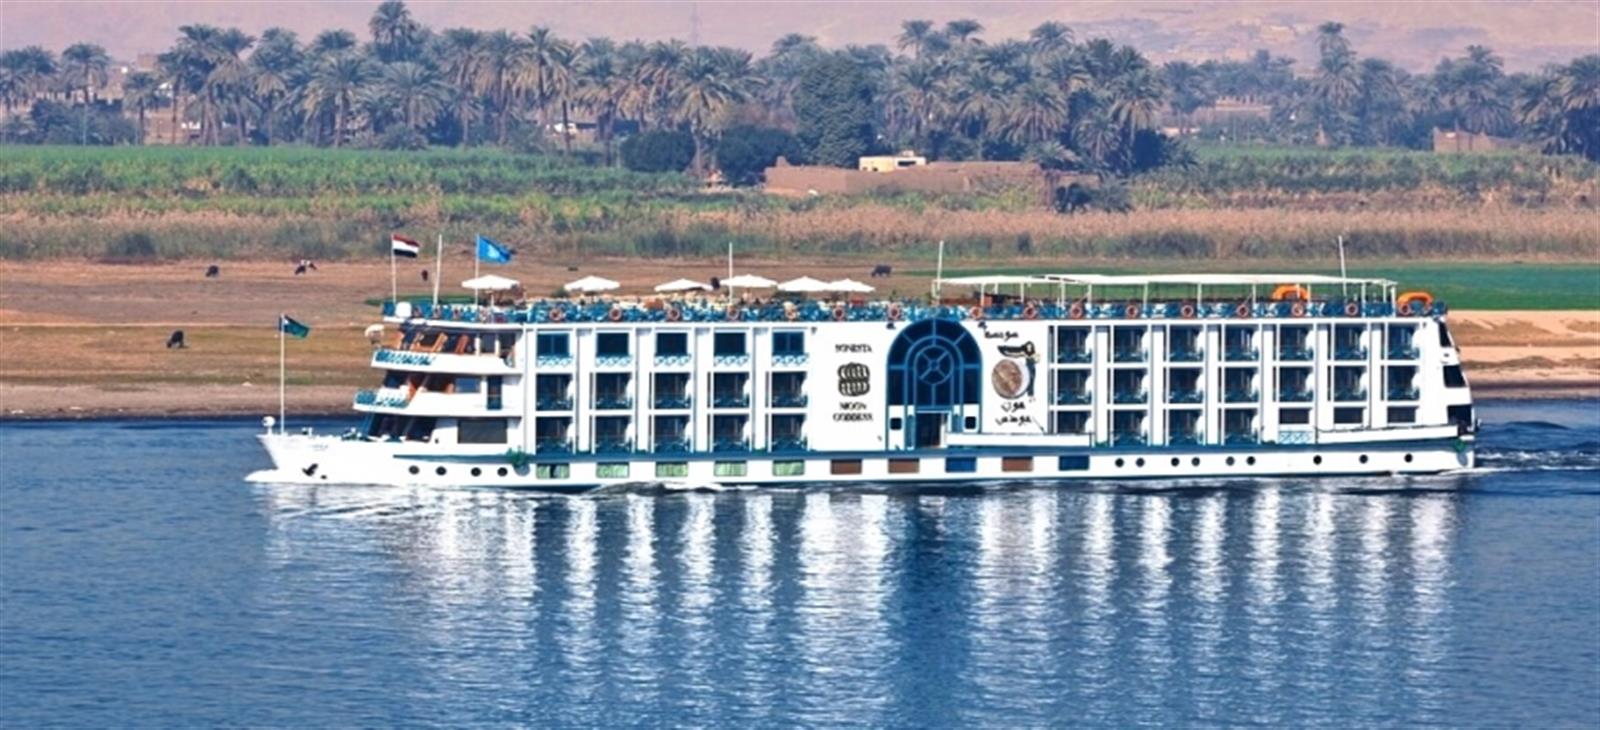  cairo accessible nile cruise holiday